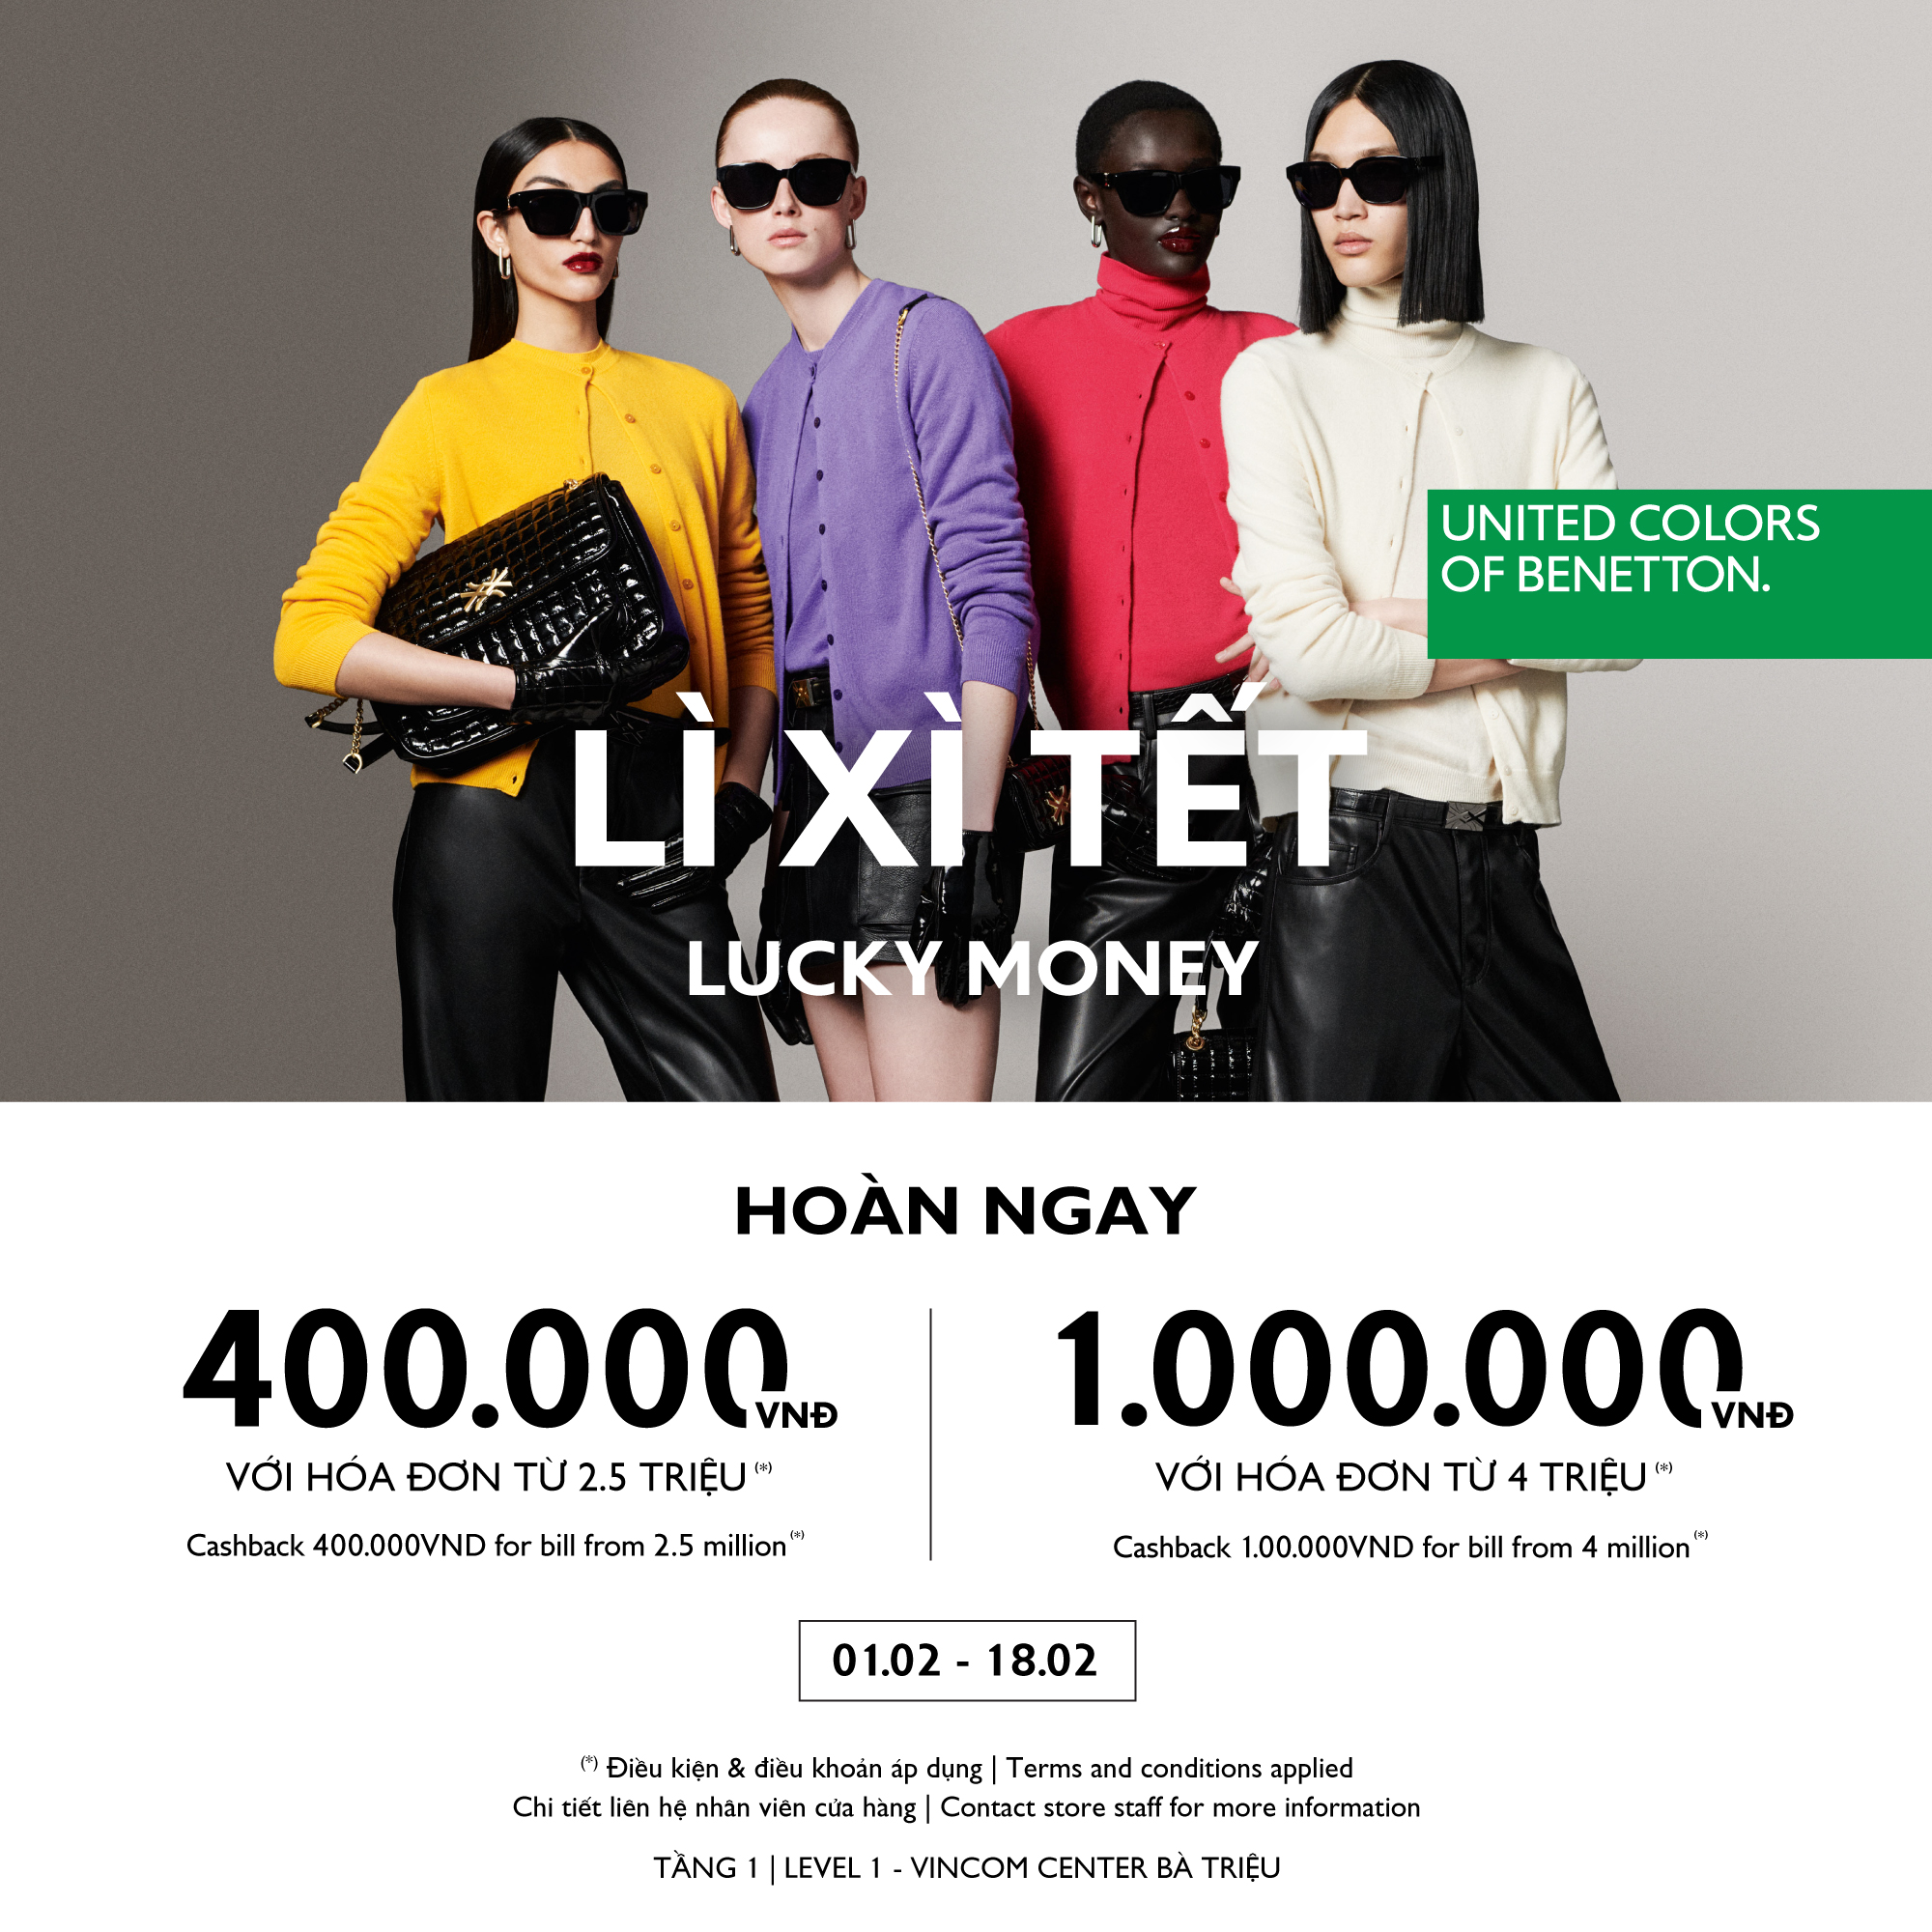 𝗨𝗡𝗜𝗧𝗘𝗗 𝗖𝗢𝗟𝗢𝗥𝗦 𝗢𝗙 𝗕𝗘𝗡𝗘𝗧𝗧𝗢𝗡 - LUCKY MONEY UP TO 1 MILLION VND